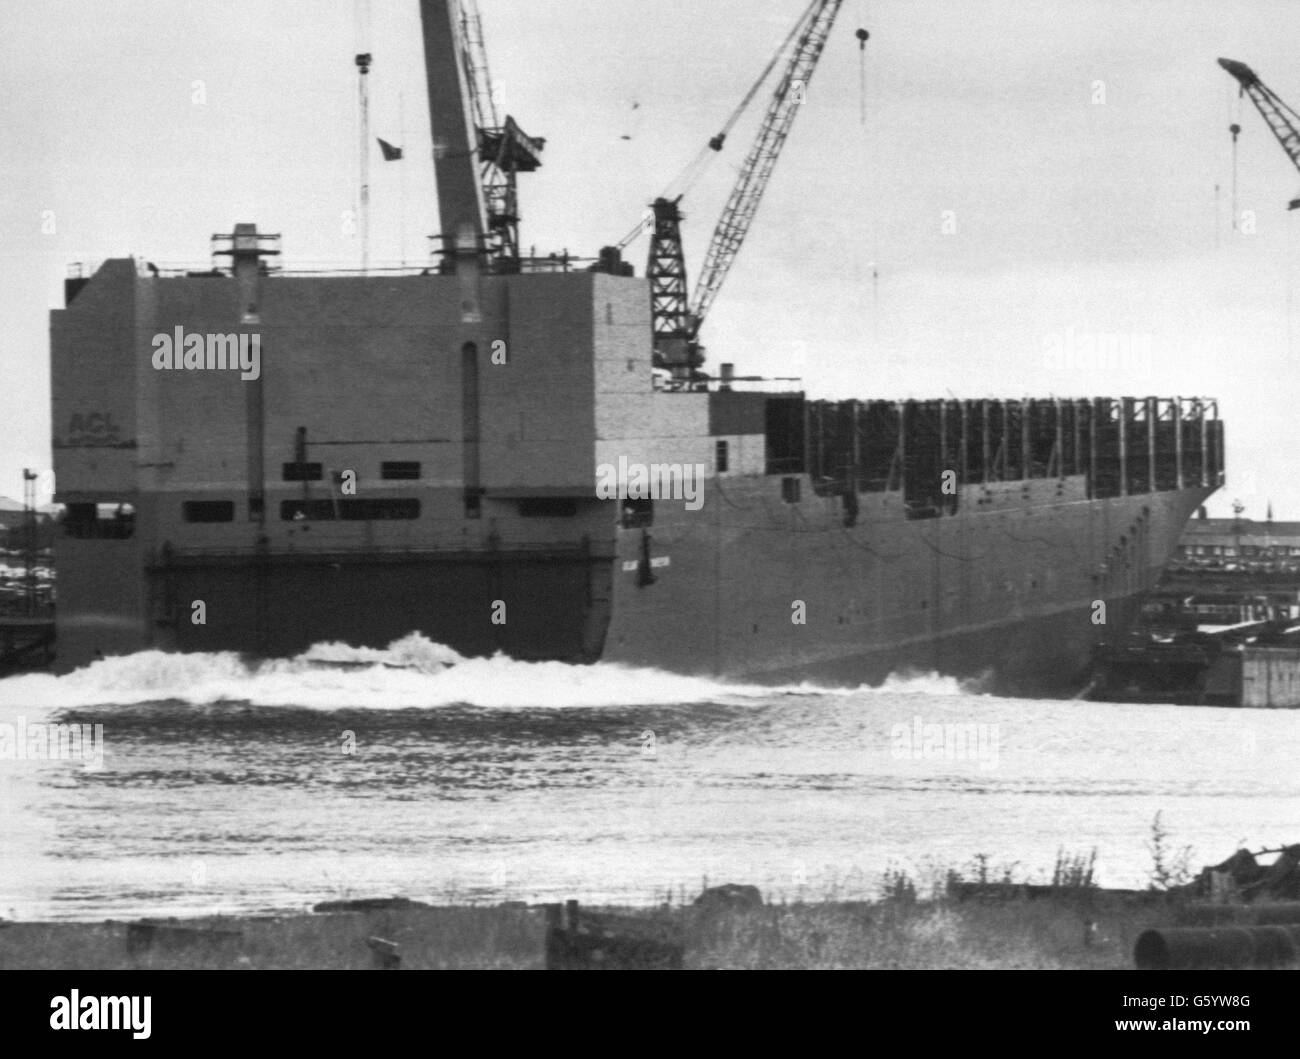 The new container ship Atlantic Conveyor after being launched by Anne Heseltine, wife of Defence Secretary Michael Heseltine, in the Wallsend Swan Hunter shipyard in Tyneside. The old Atlantic Conveyor was destroyed during the Falklands War. Stock Photo